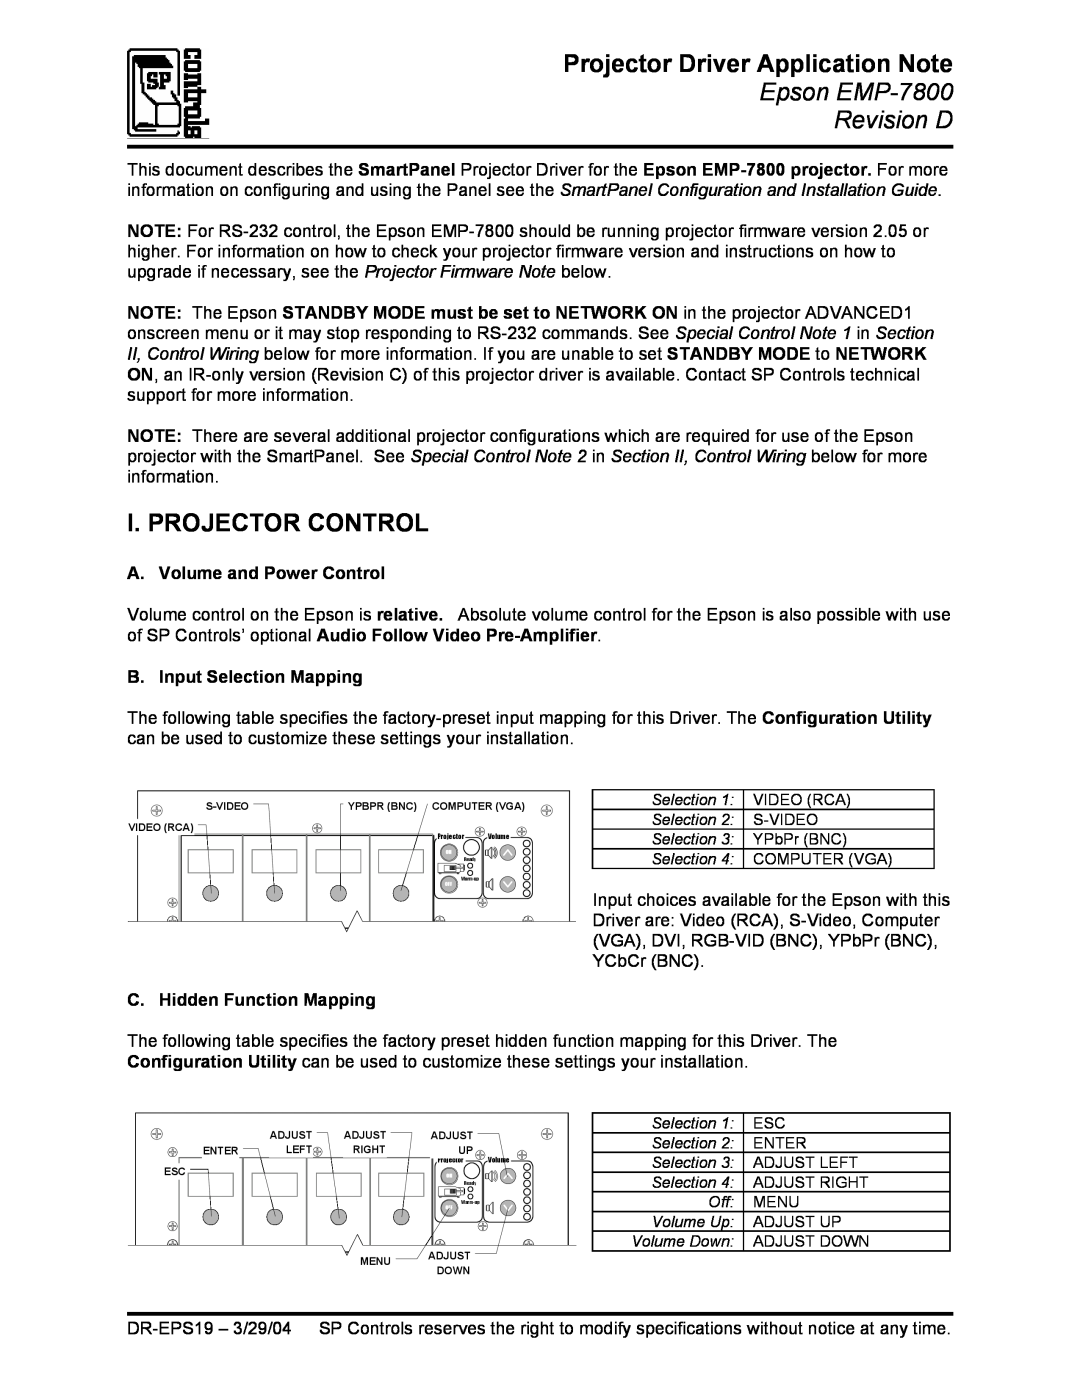 Epson DR-EPS19 quick start Projector Driver Application Note, I. Projector Control, A. Volume and Power Control 